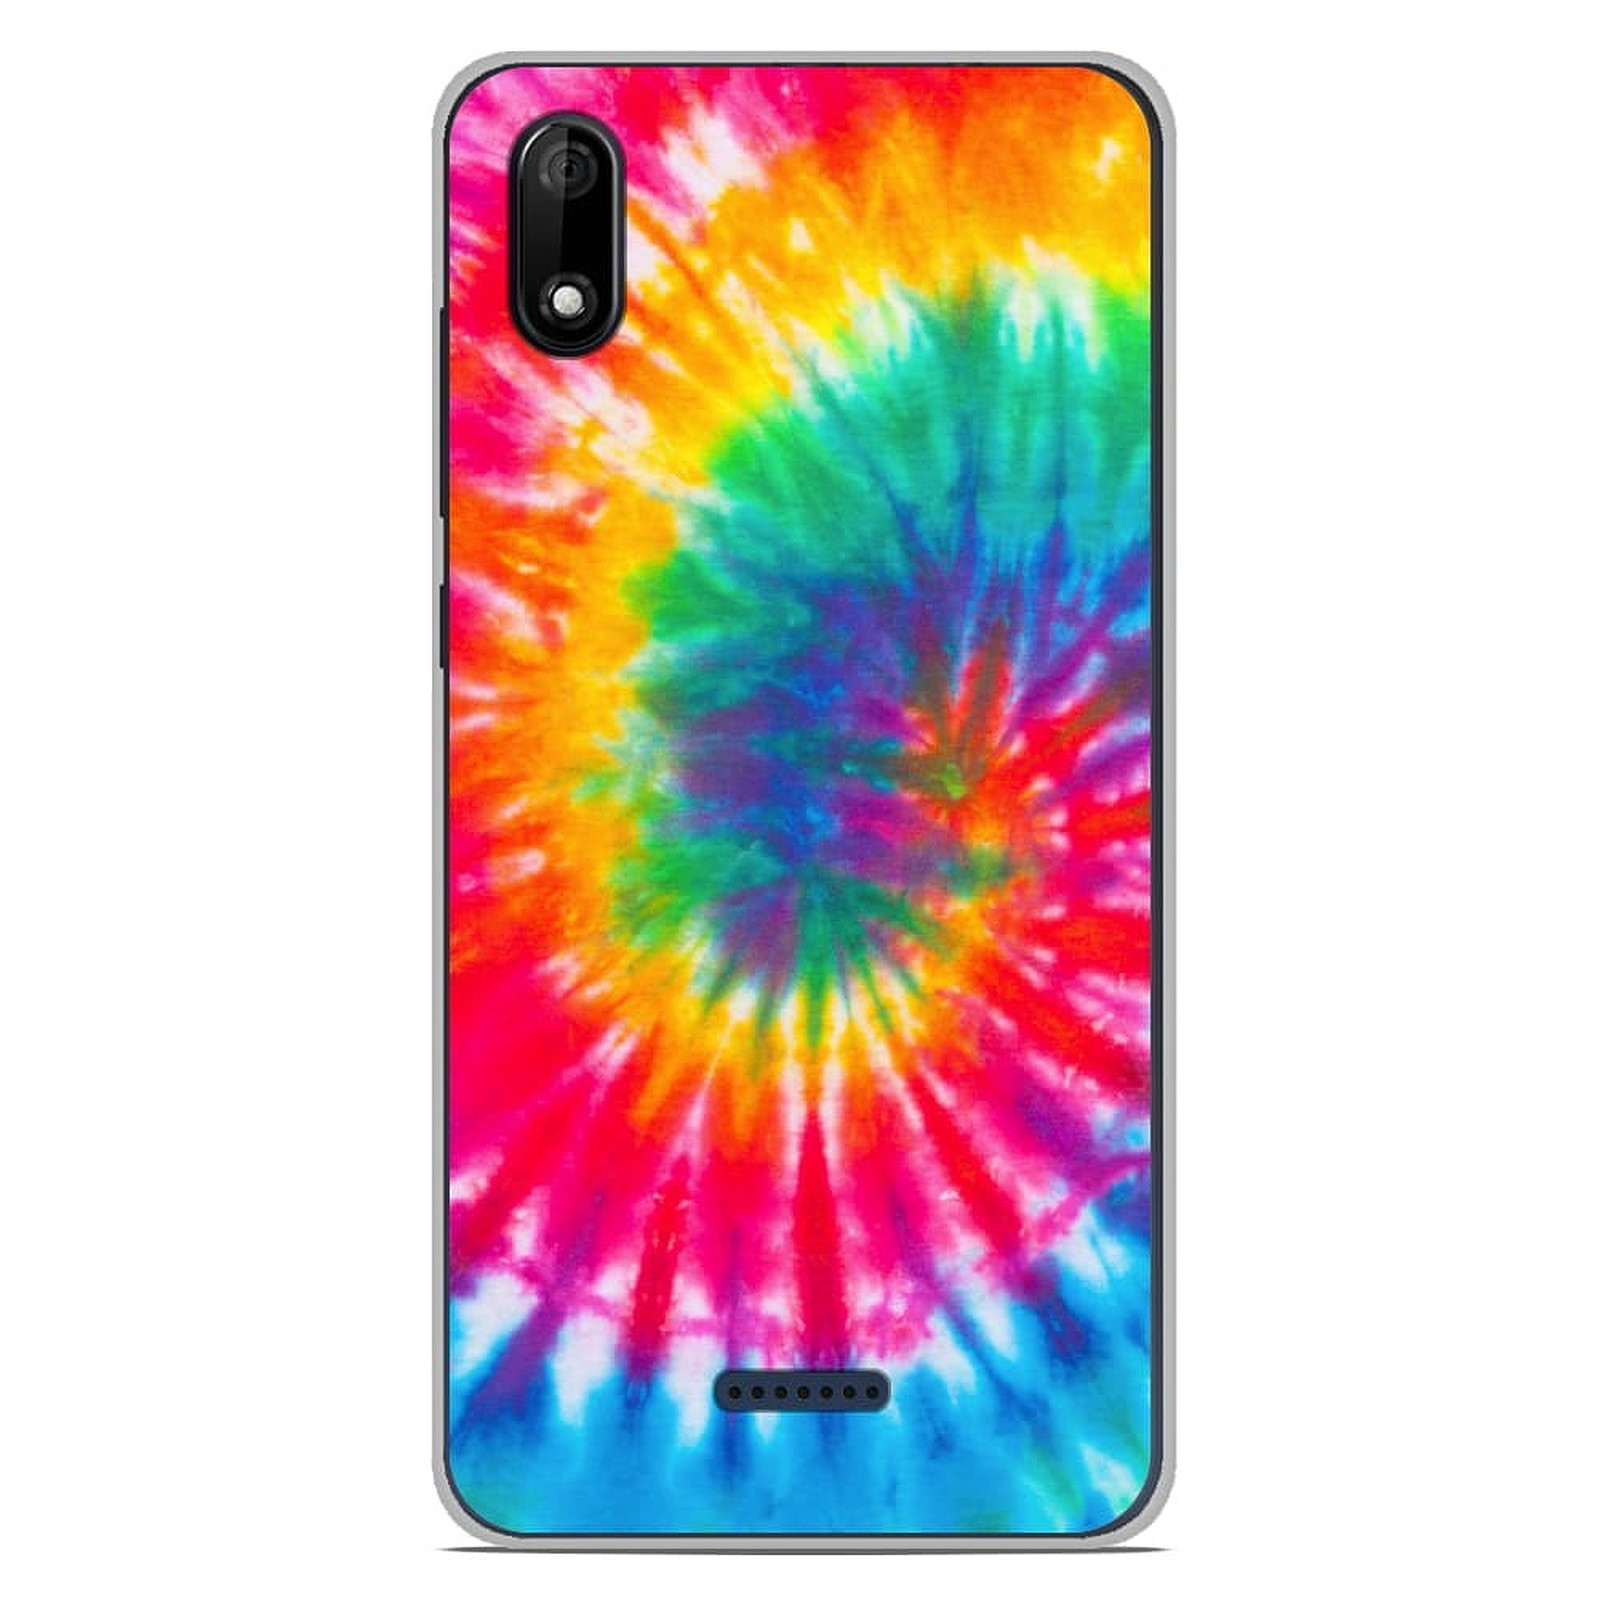 1001 Coques Coque silicone gel Wiko Y60 motif Tie Dye Spirale - Coque telephone 1001Coques